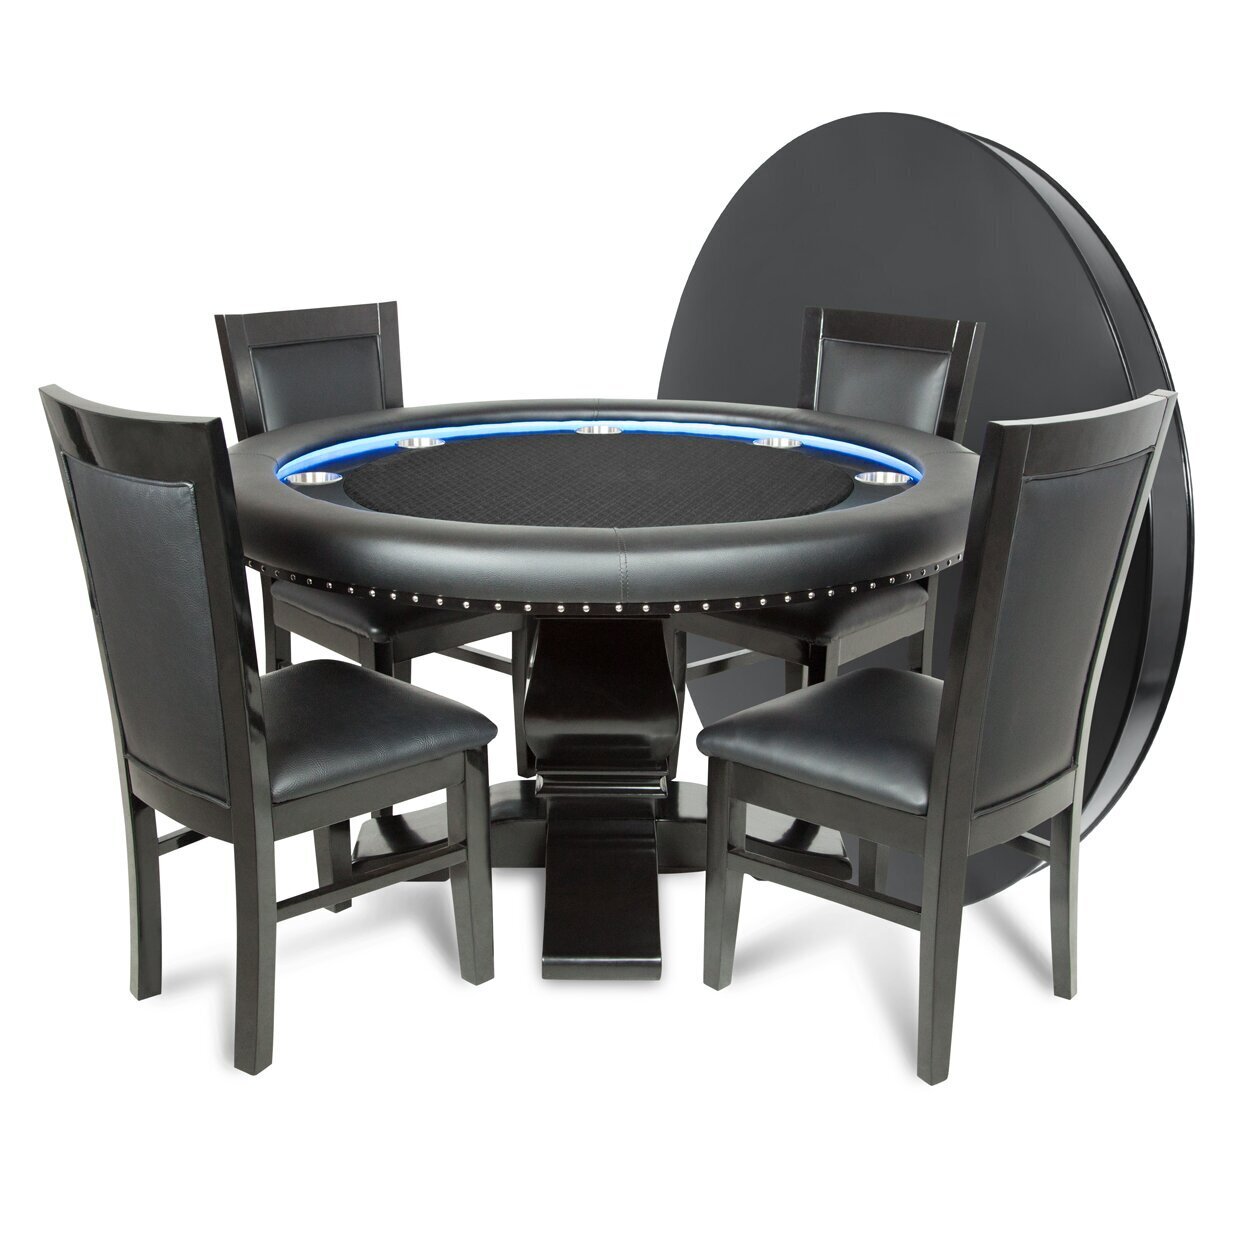 Small Poker Table With Chairs